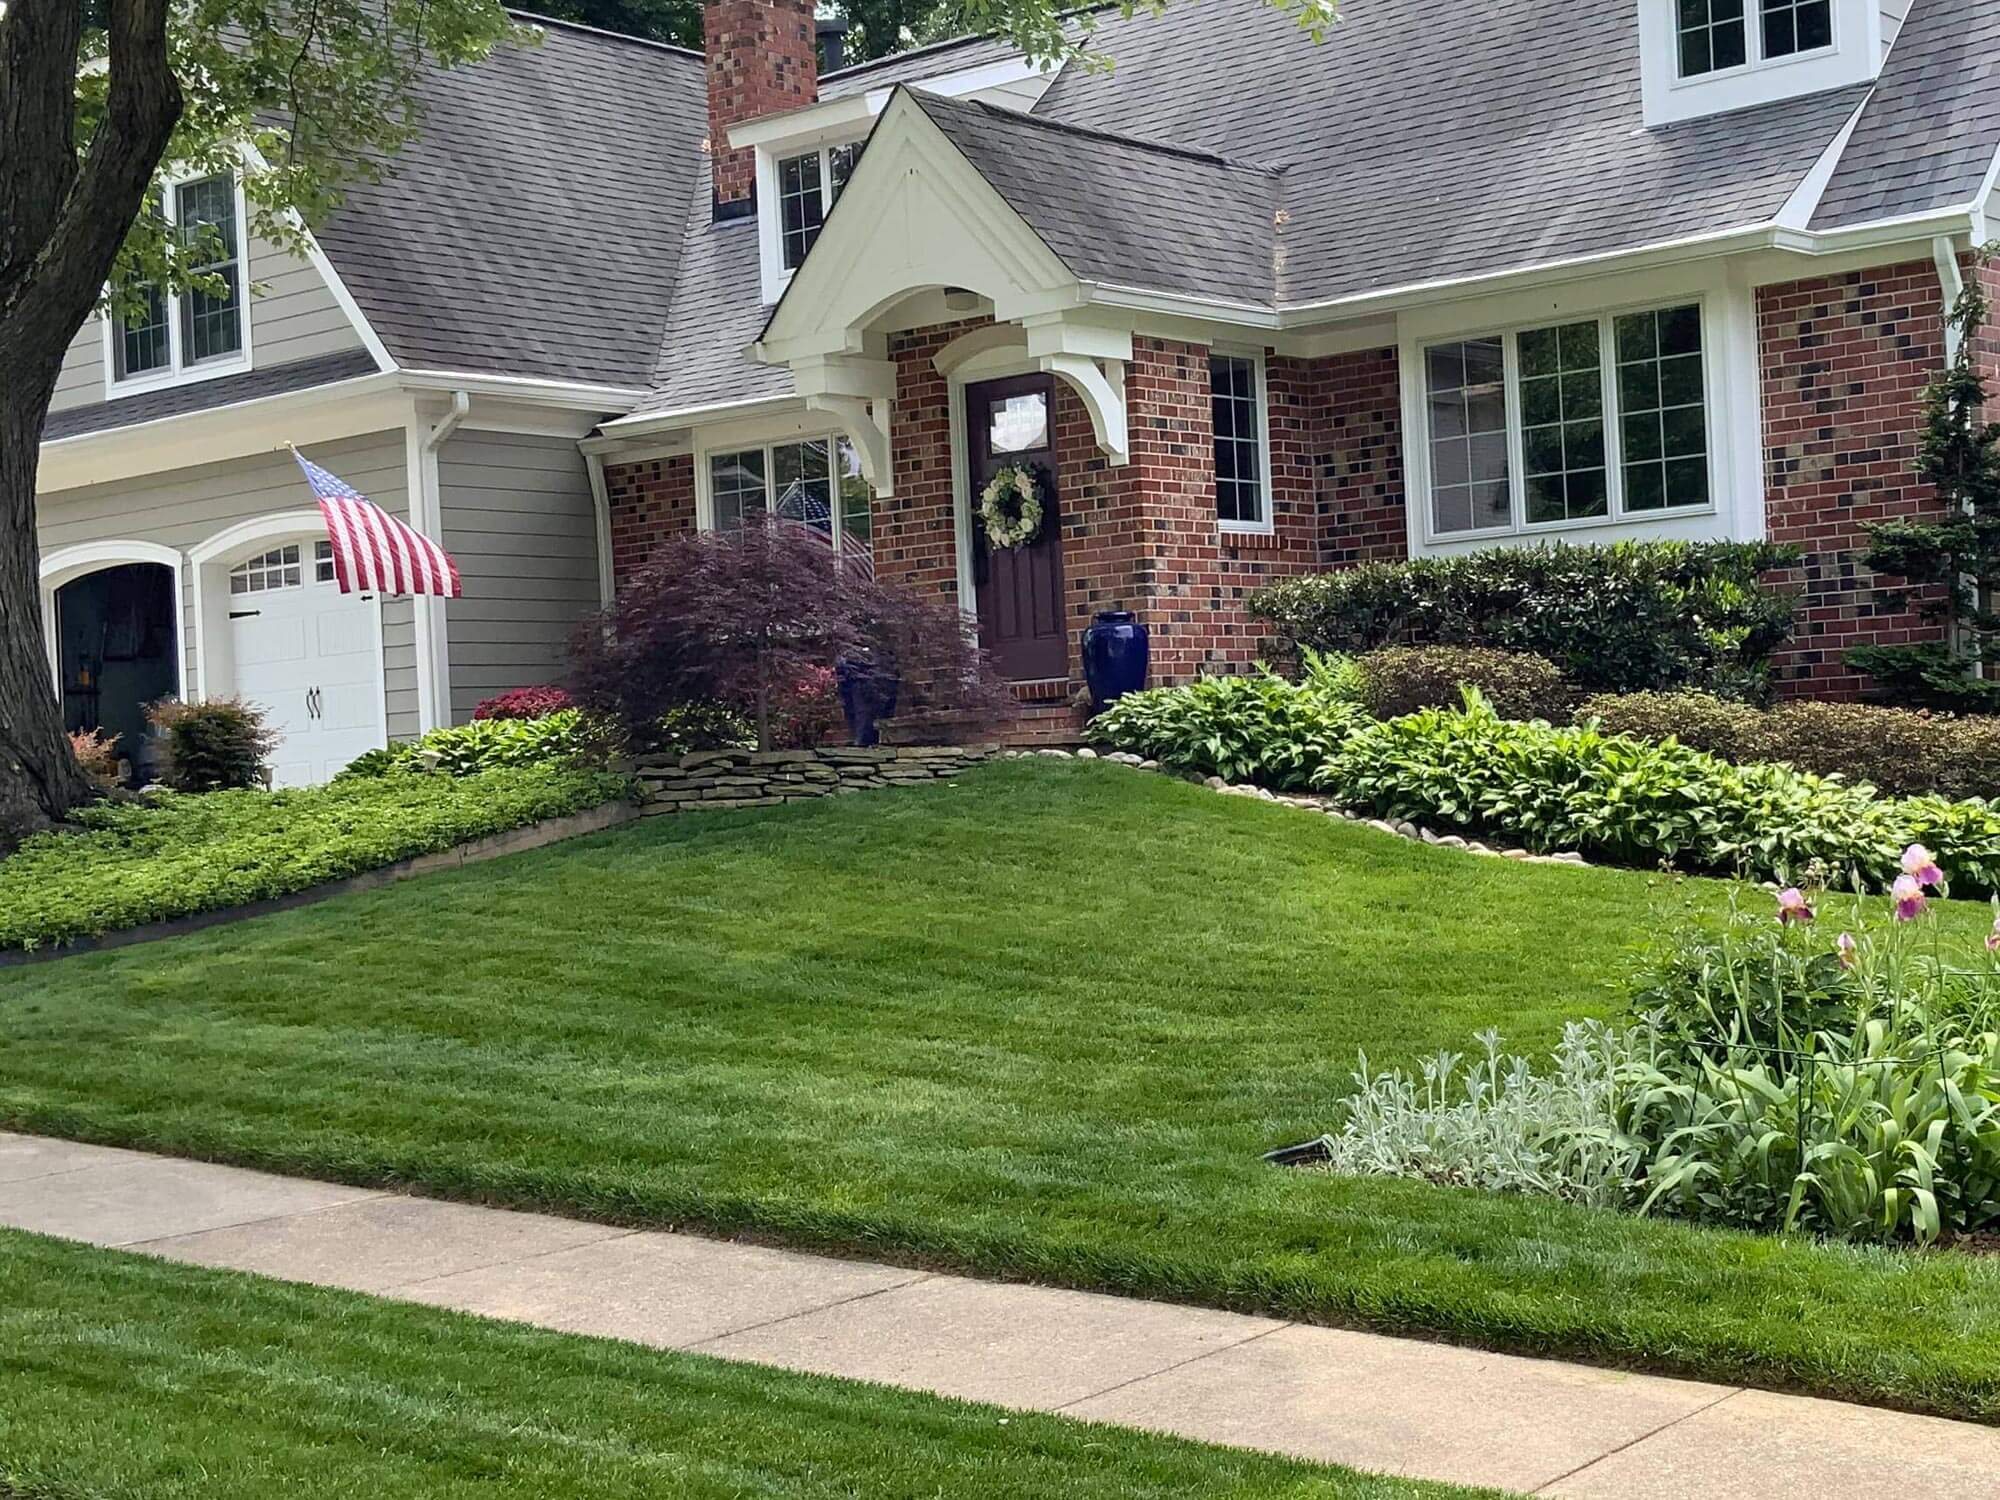 Mowing Lawn Suburban Home